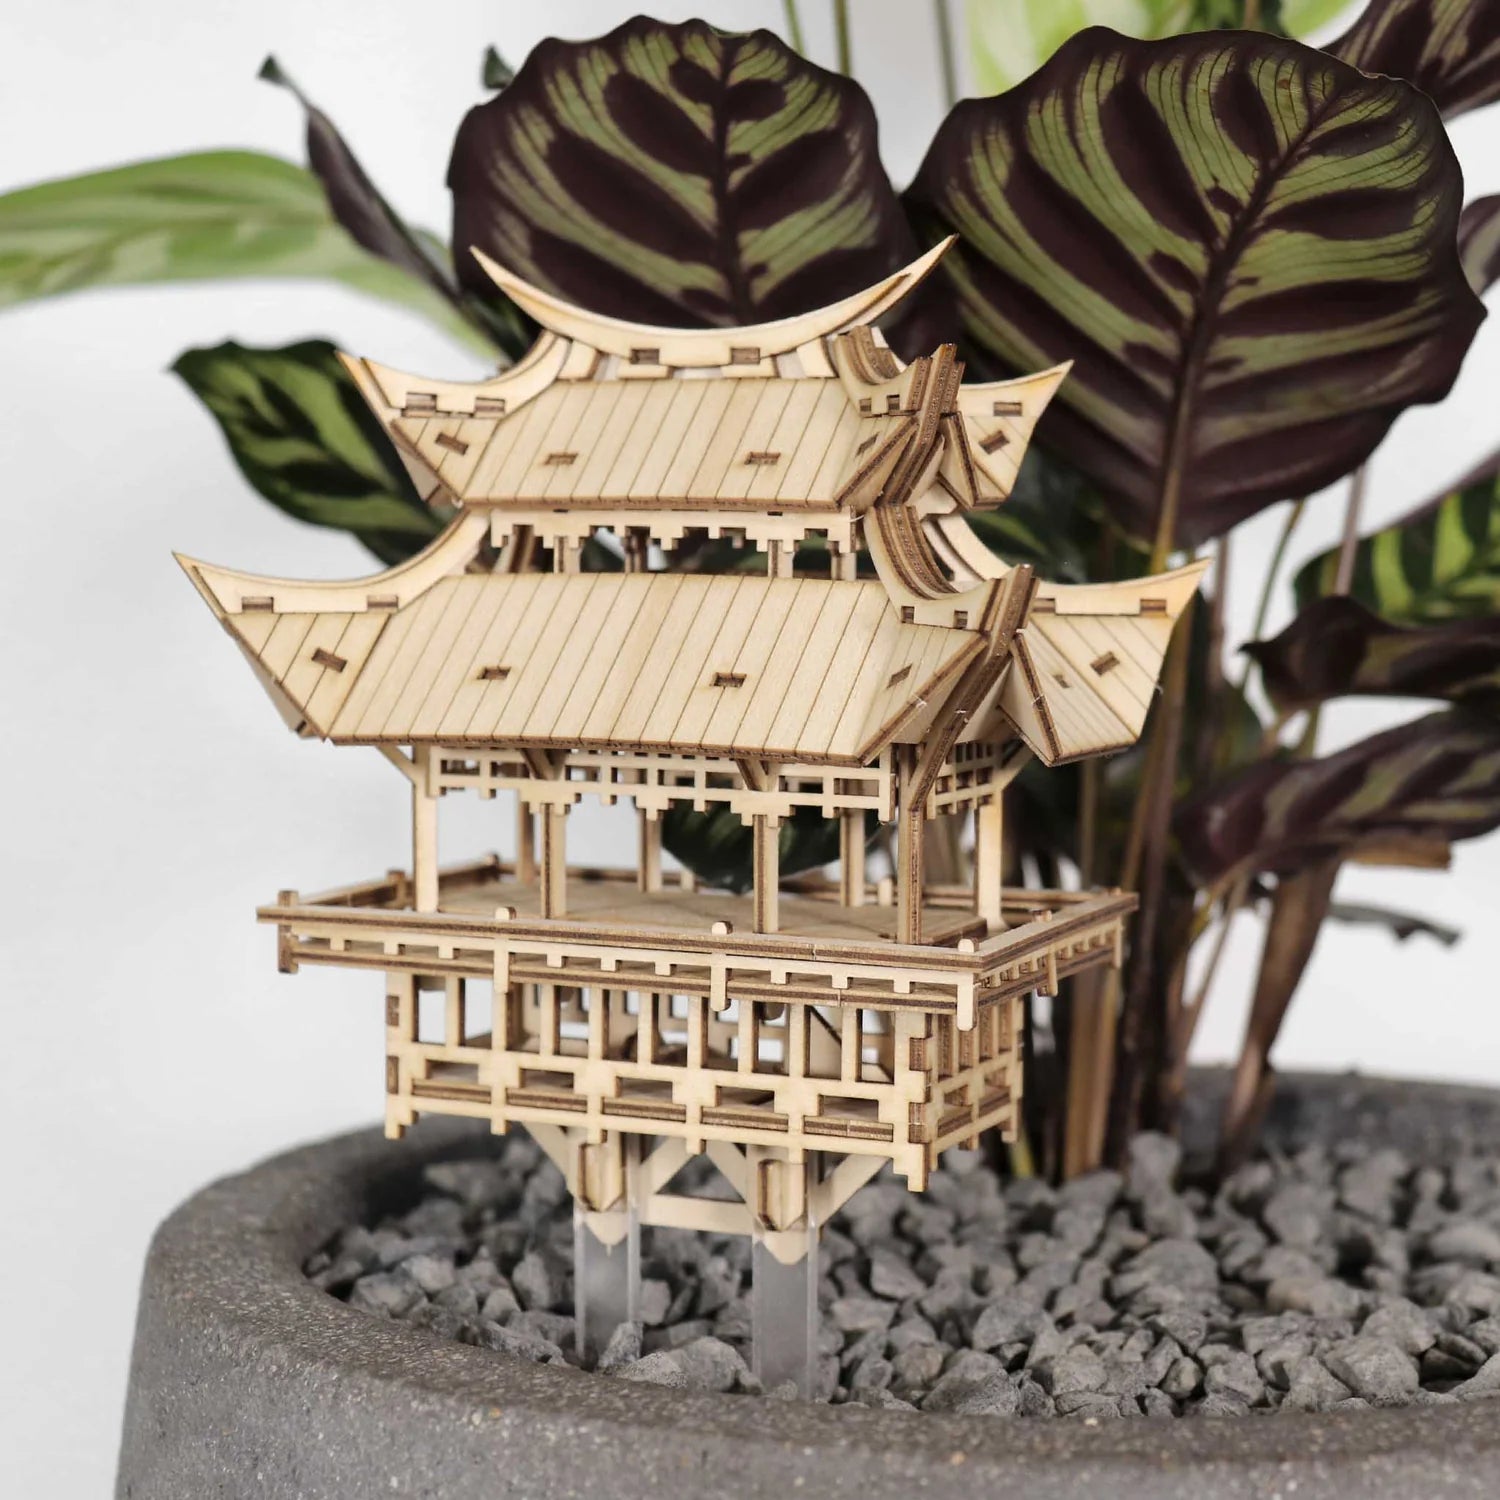 Wooden treehouse model in potted plant